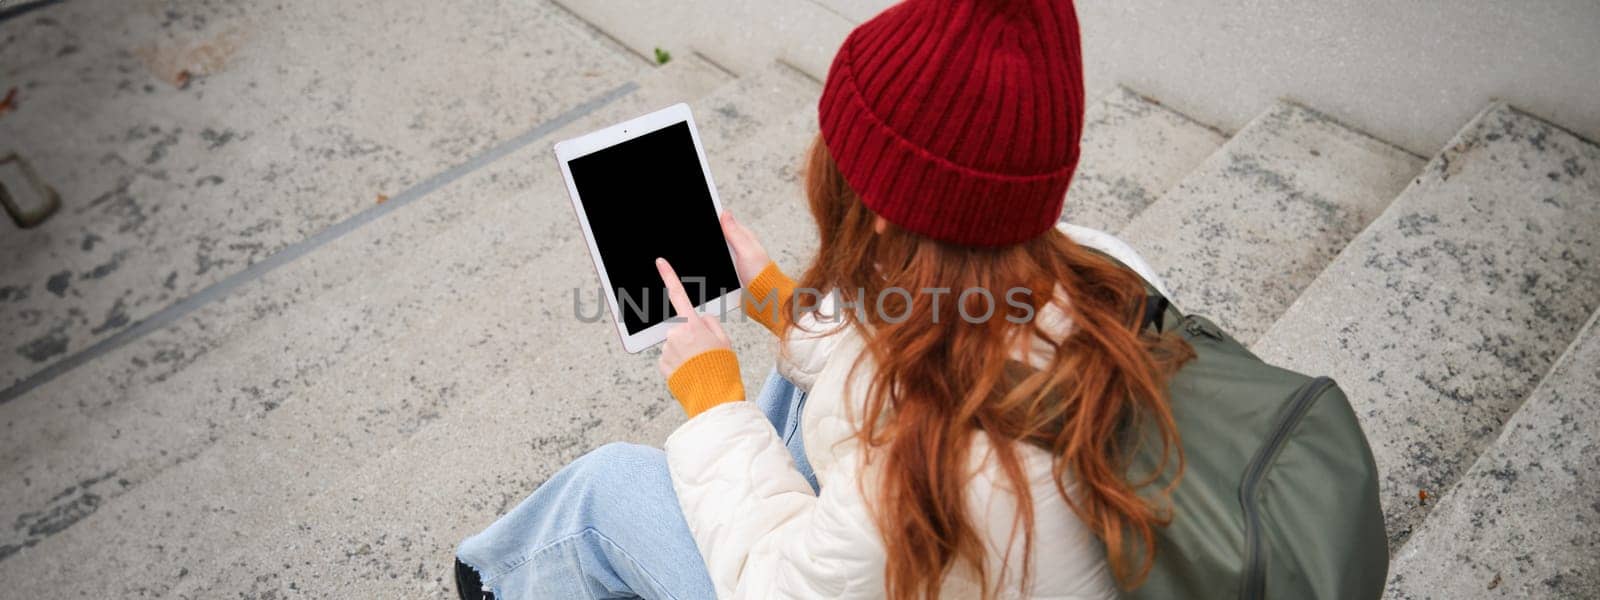 Rear view of redhead girl touches digital tablet screen, touchpad, texts message, uses internet application on gadget, sits on stairs outdoors.